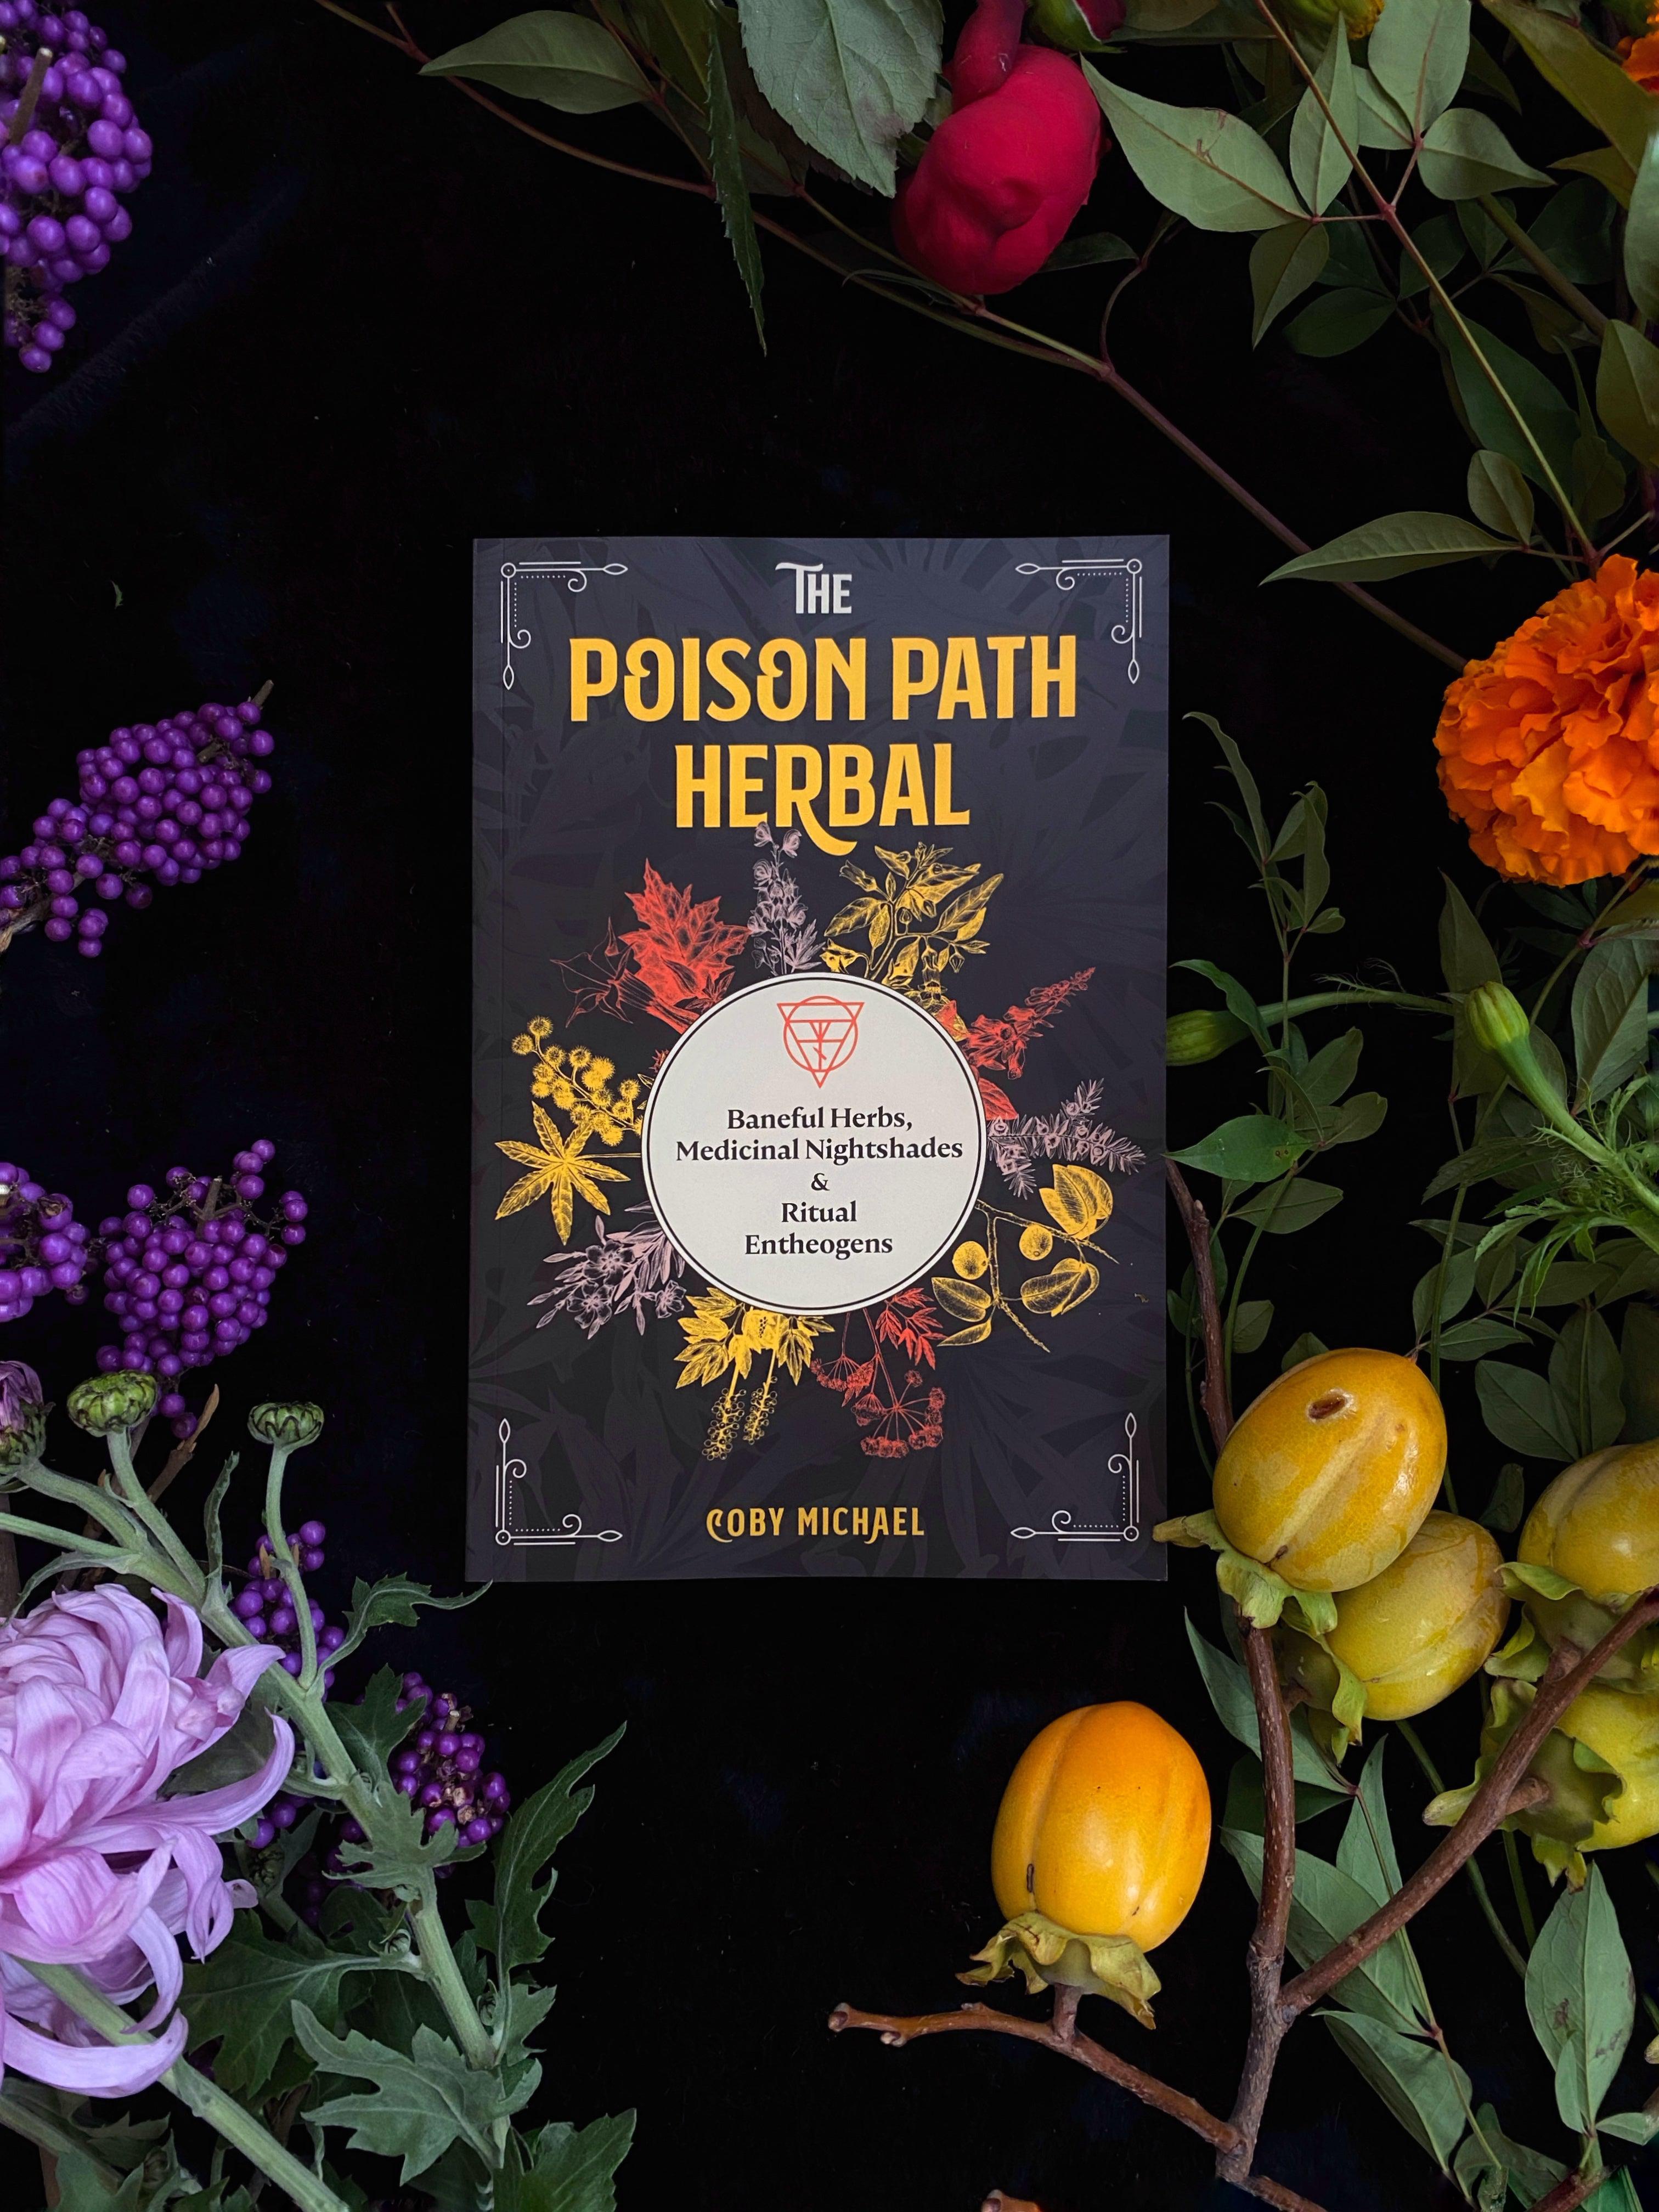 The Poison Path Herbal Baneful Herbs, Medicinal Nightshades, and Ritual Entheogens - Keven Craft Rituals